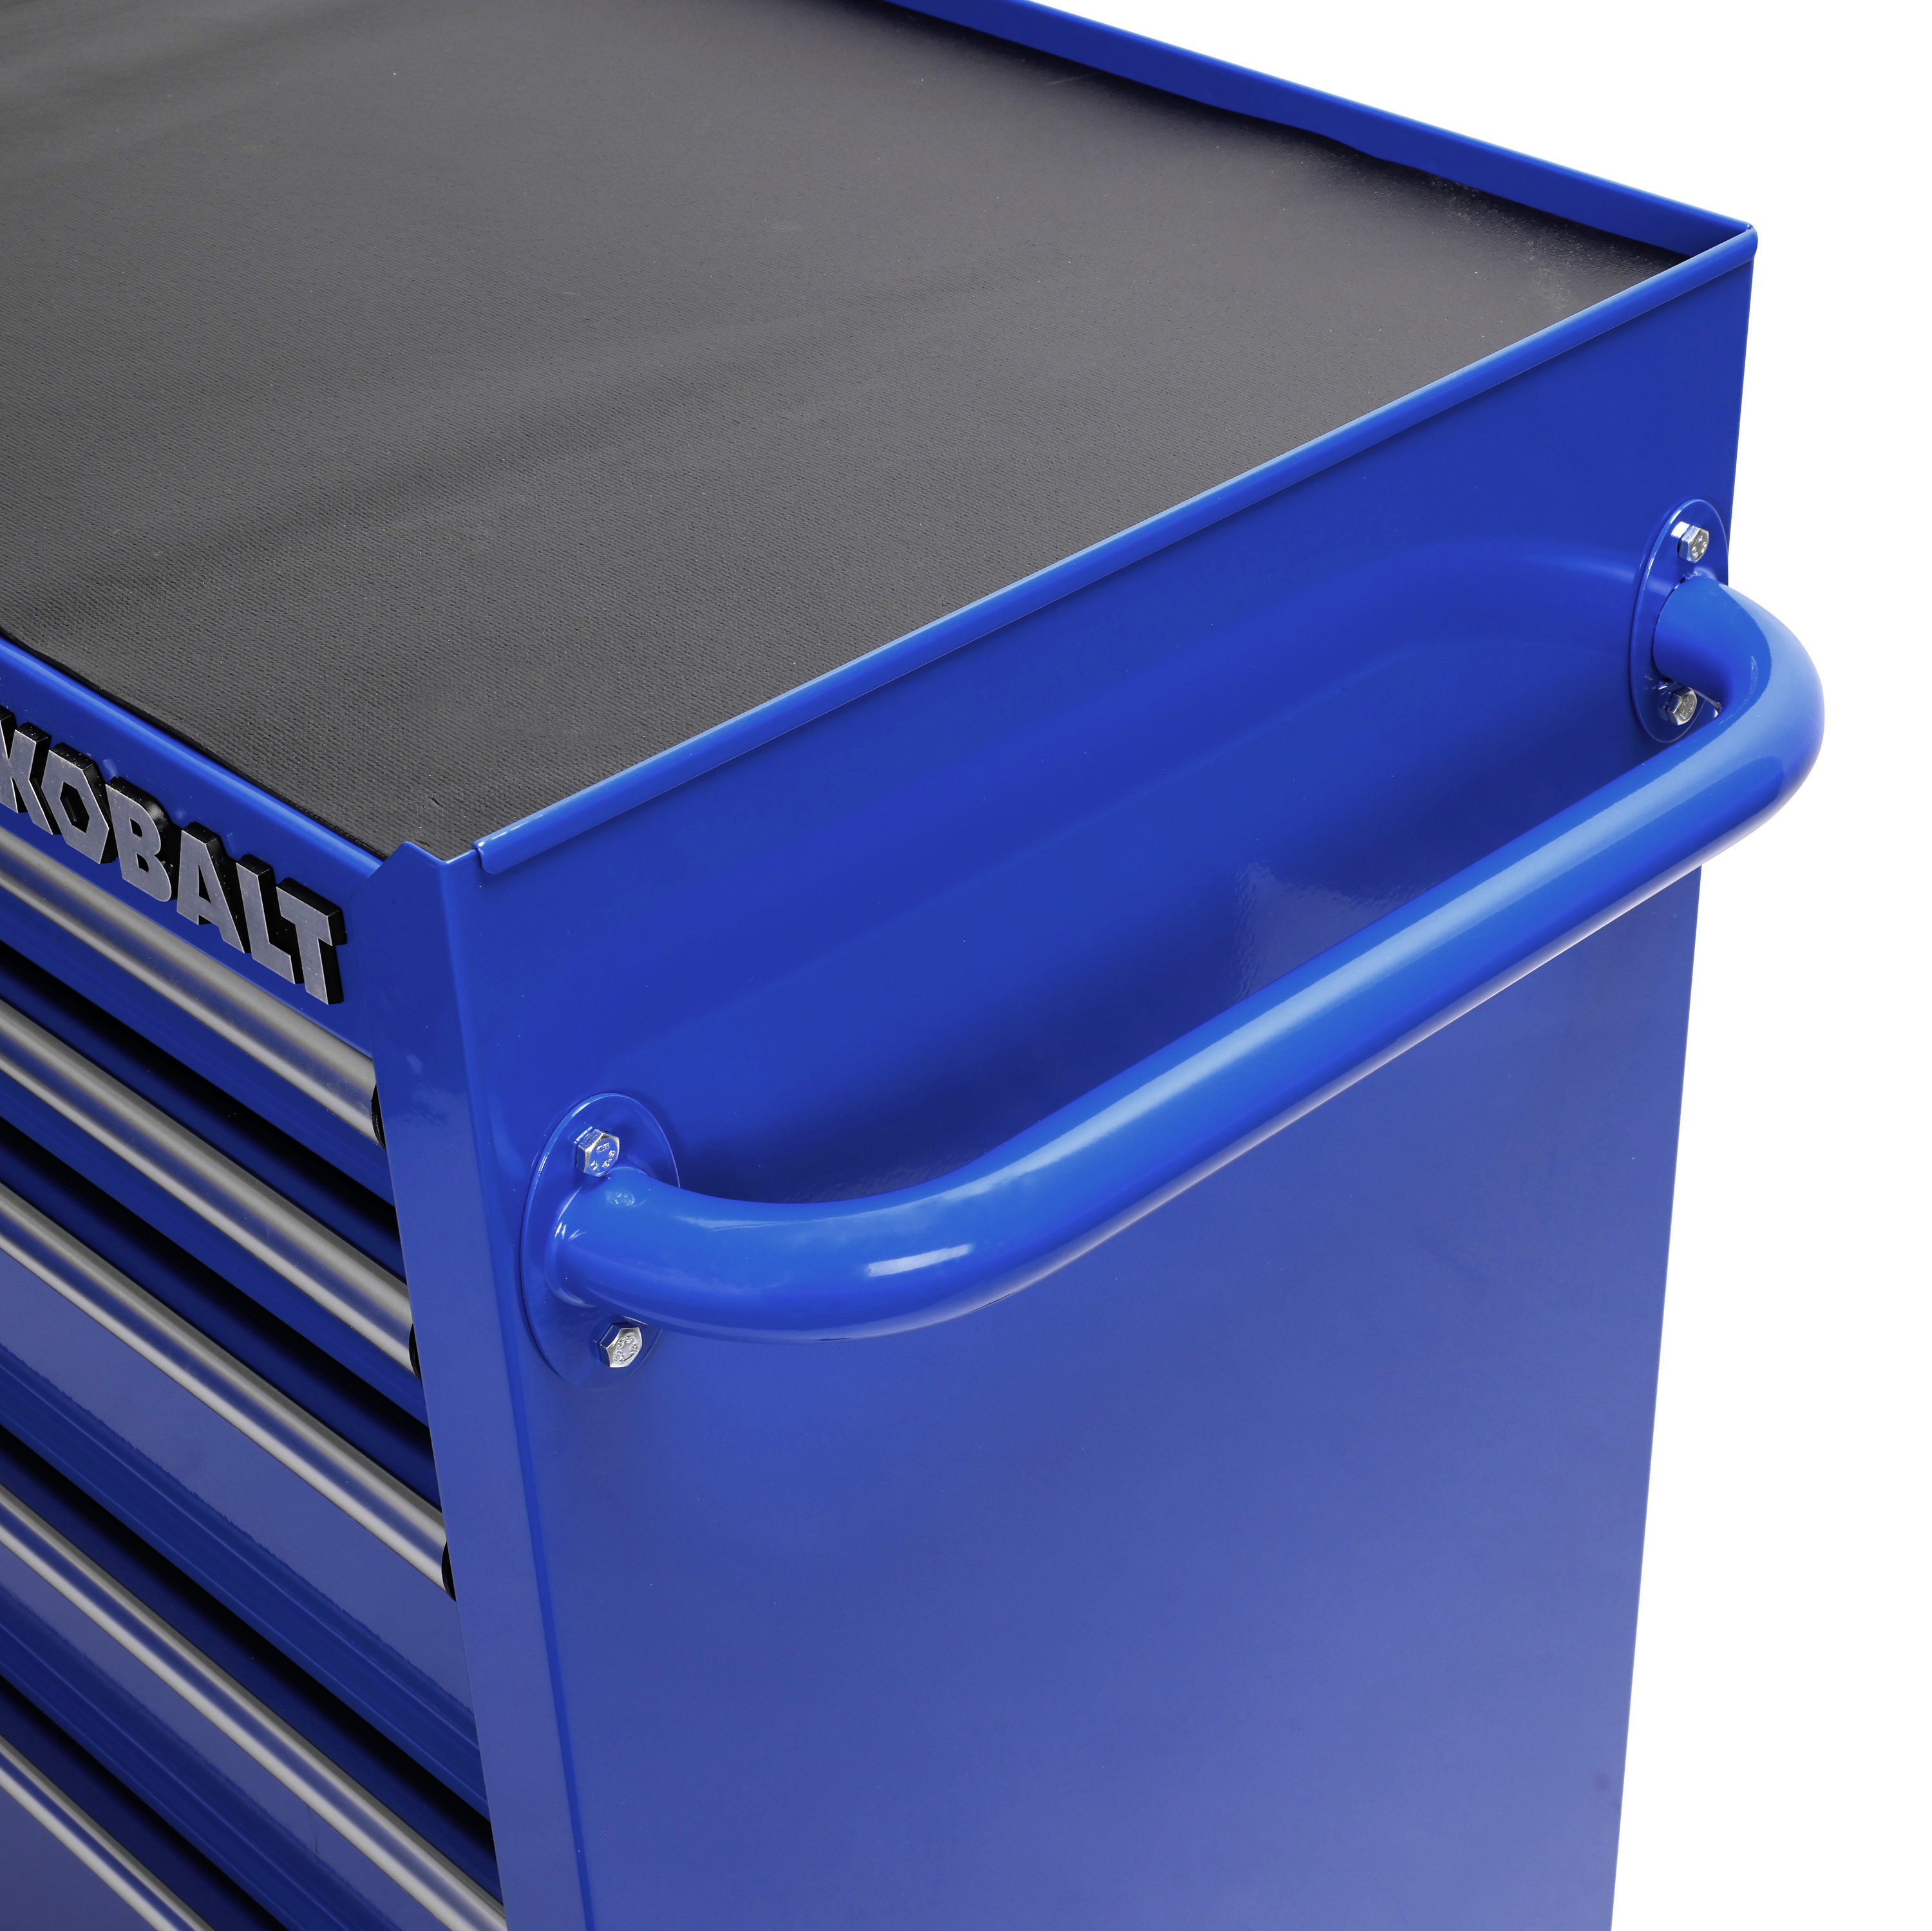 Kobalt 36-in W x 37.8-in H 5-Drawer Steel Rolling Tool Cabinet (Blue) at